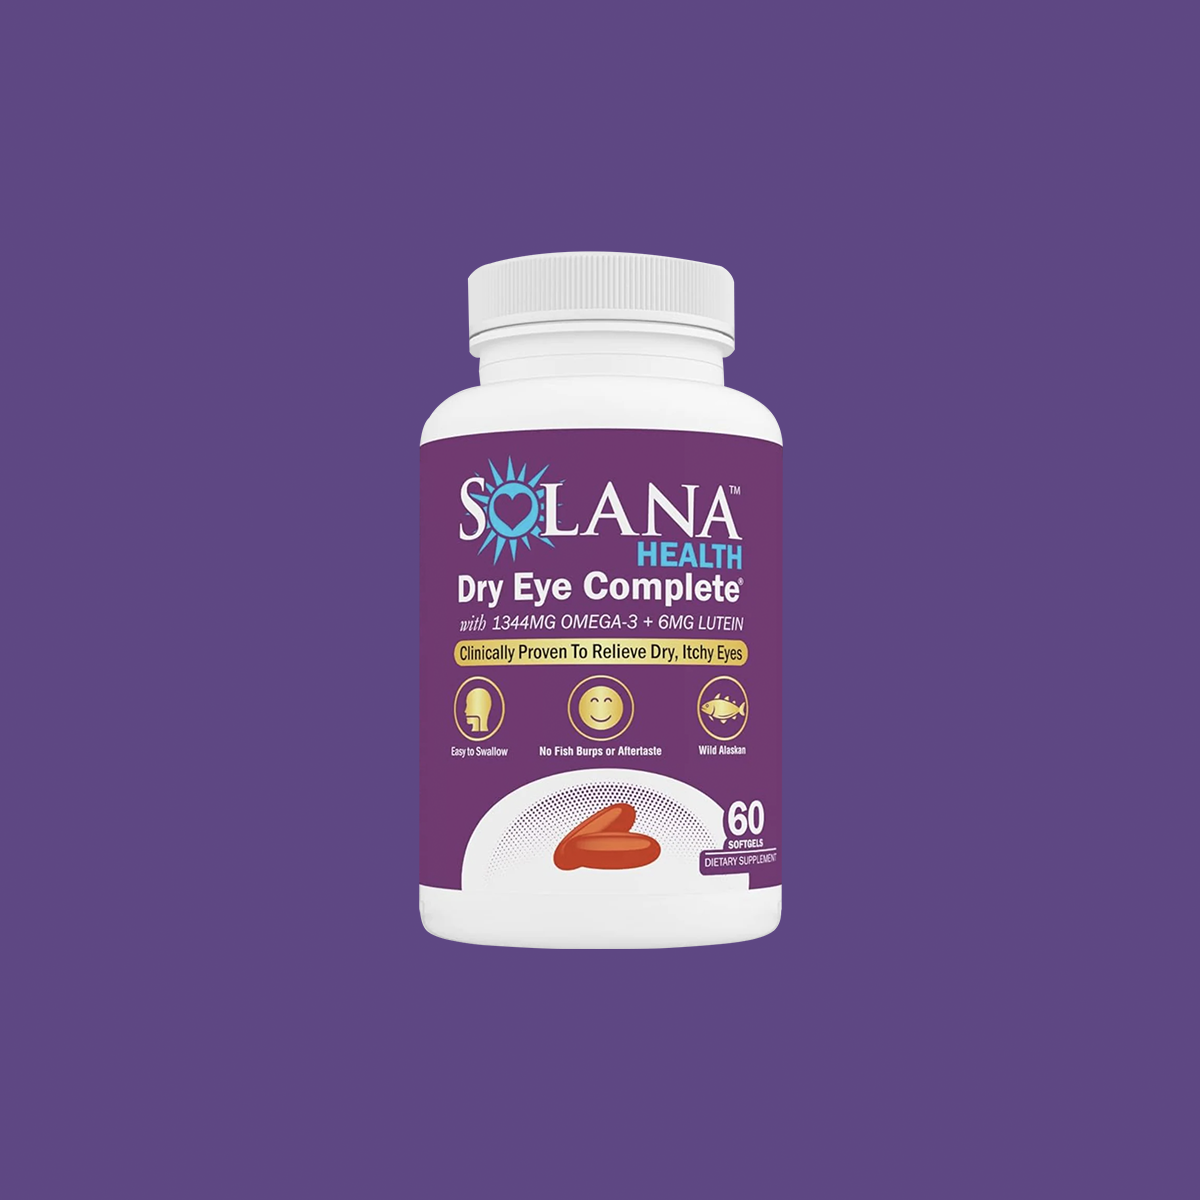 Solana Health Dry Eye Complete with Omega and Lutein (60ct Bottle)